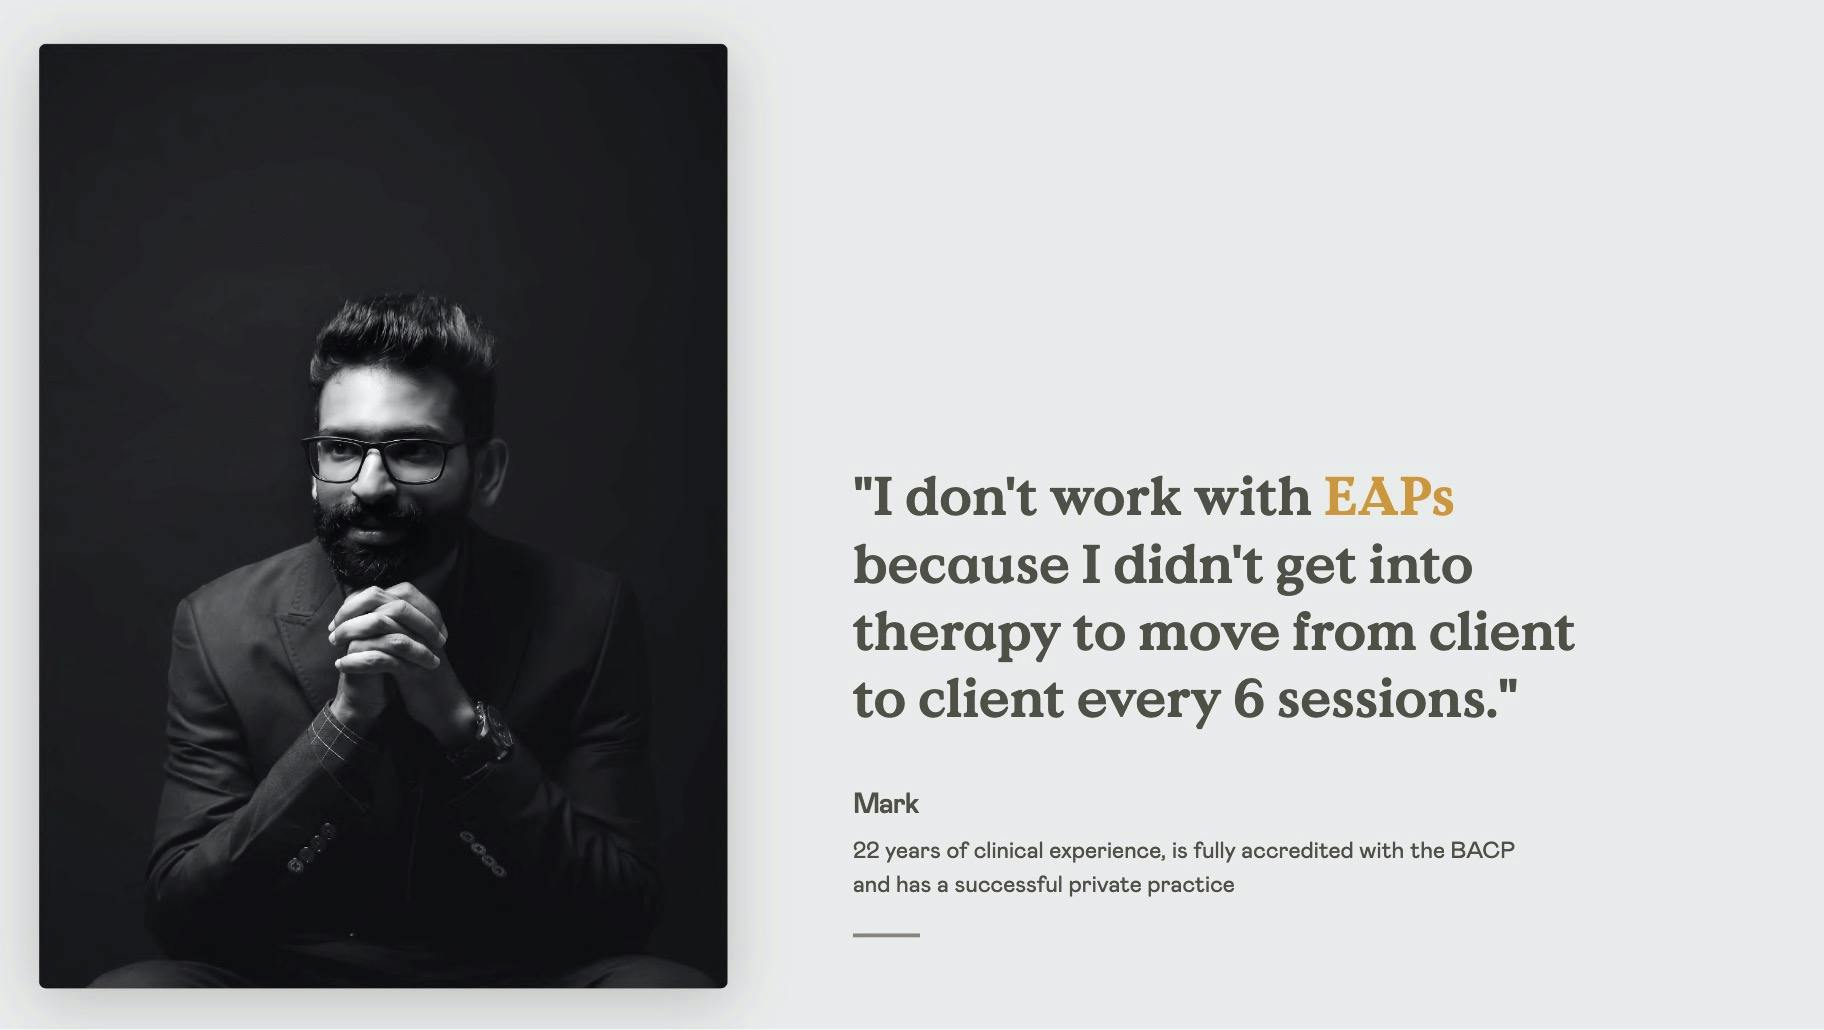 therapists don't like to work with EAPs because of their limited hours per client. 